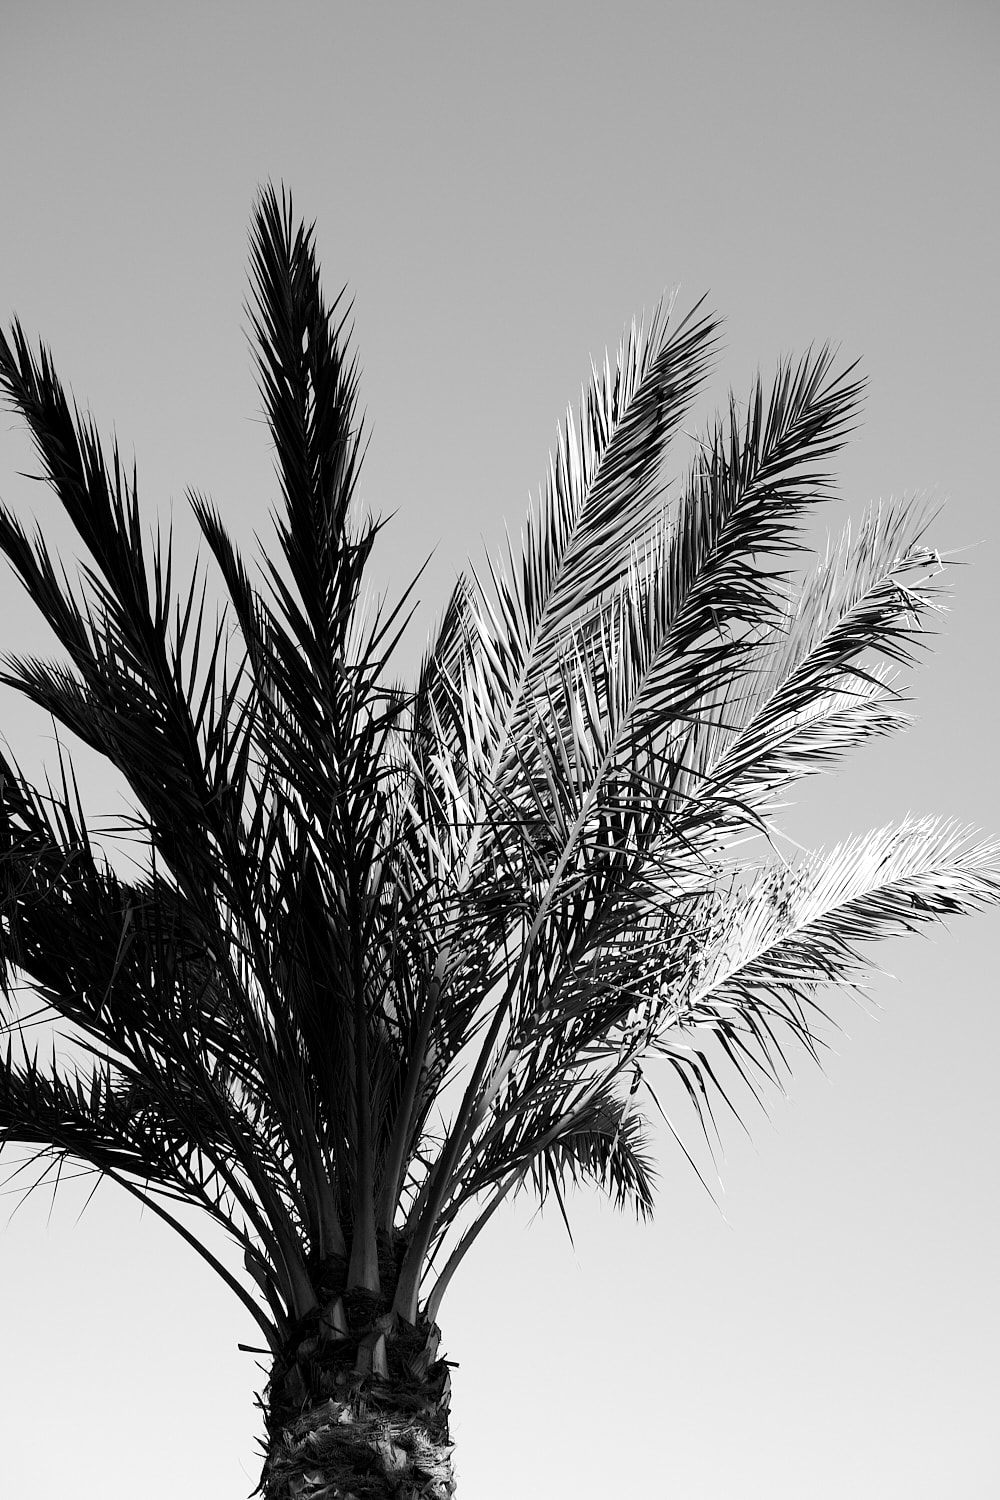 Black and white portrait photo of the top of a palm tree.